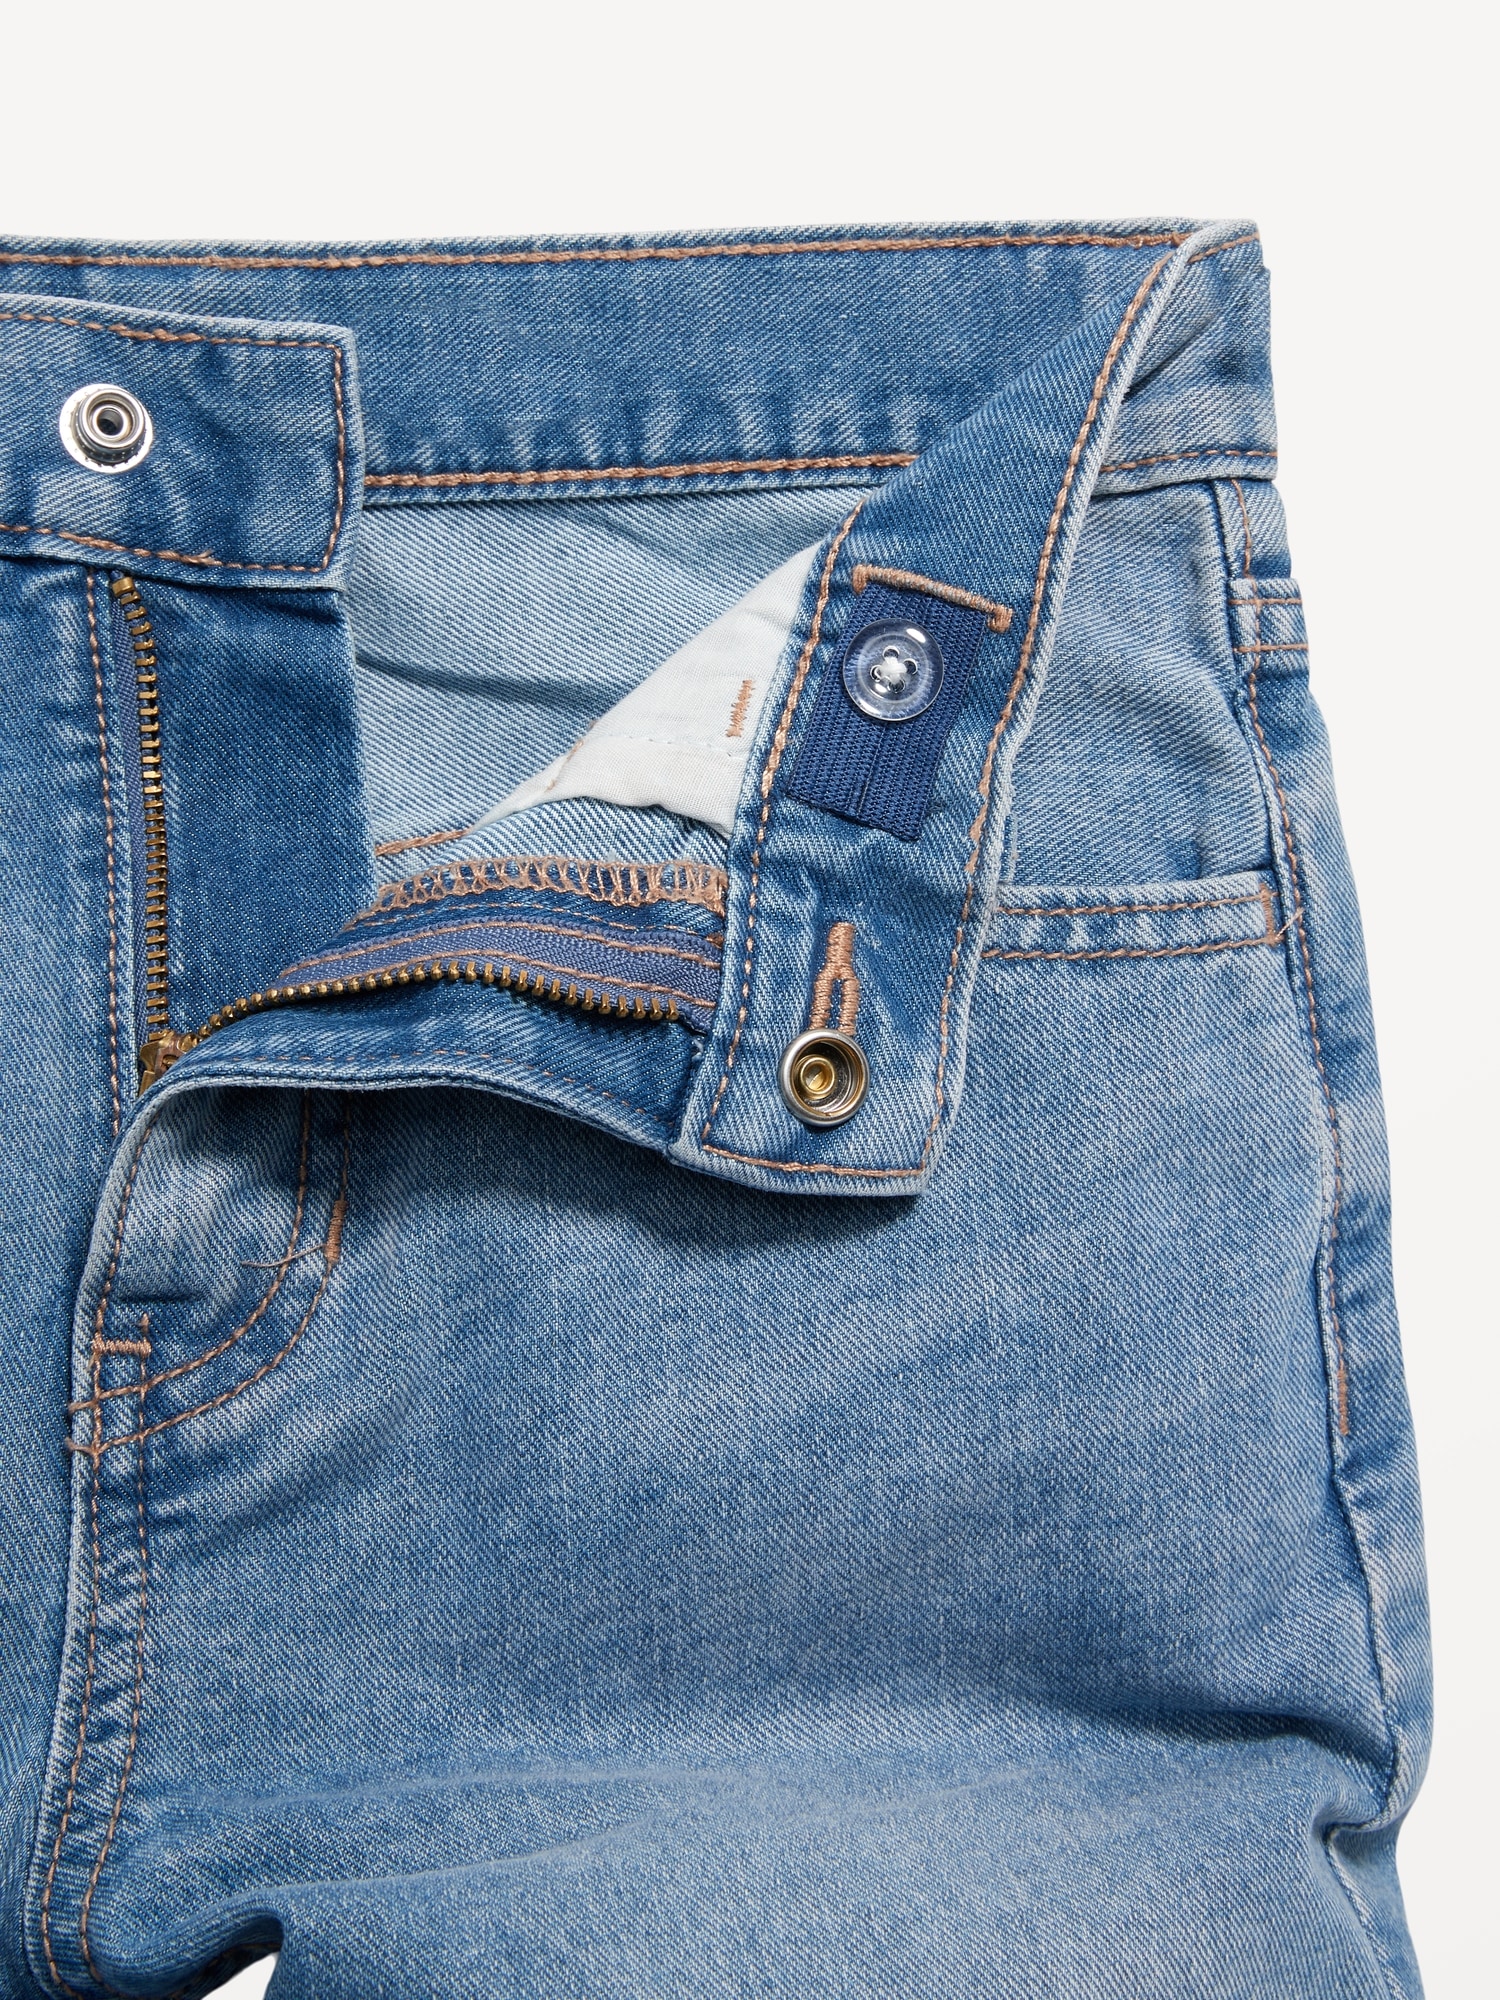 Zara - Jeans with Adjustable Interior Waistband and Front Button Closure. Front Patch Pockets. Frayed Hem. - Light Blue - Unisex